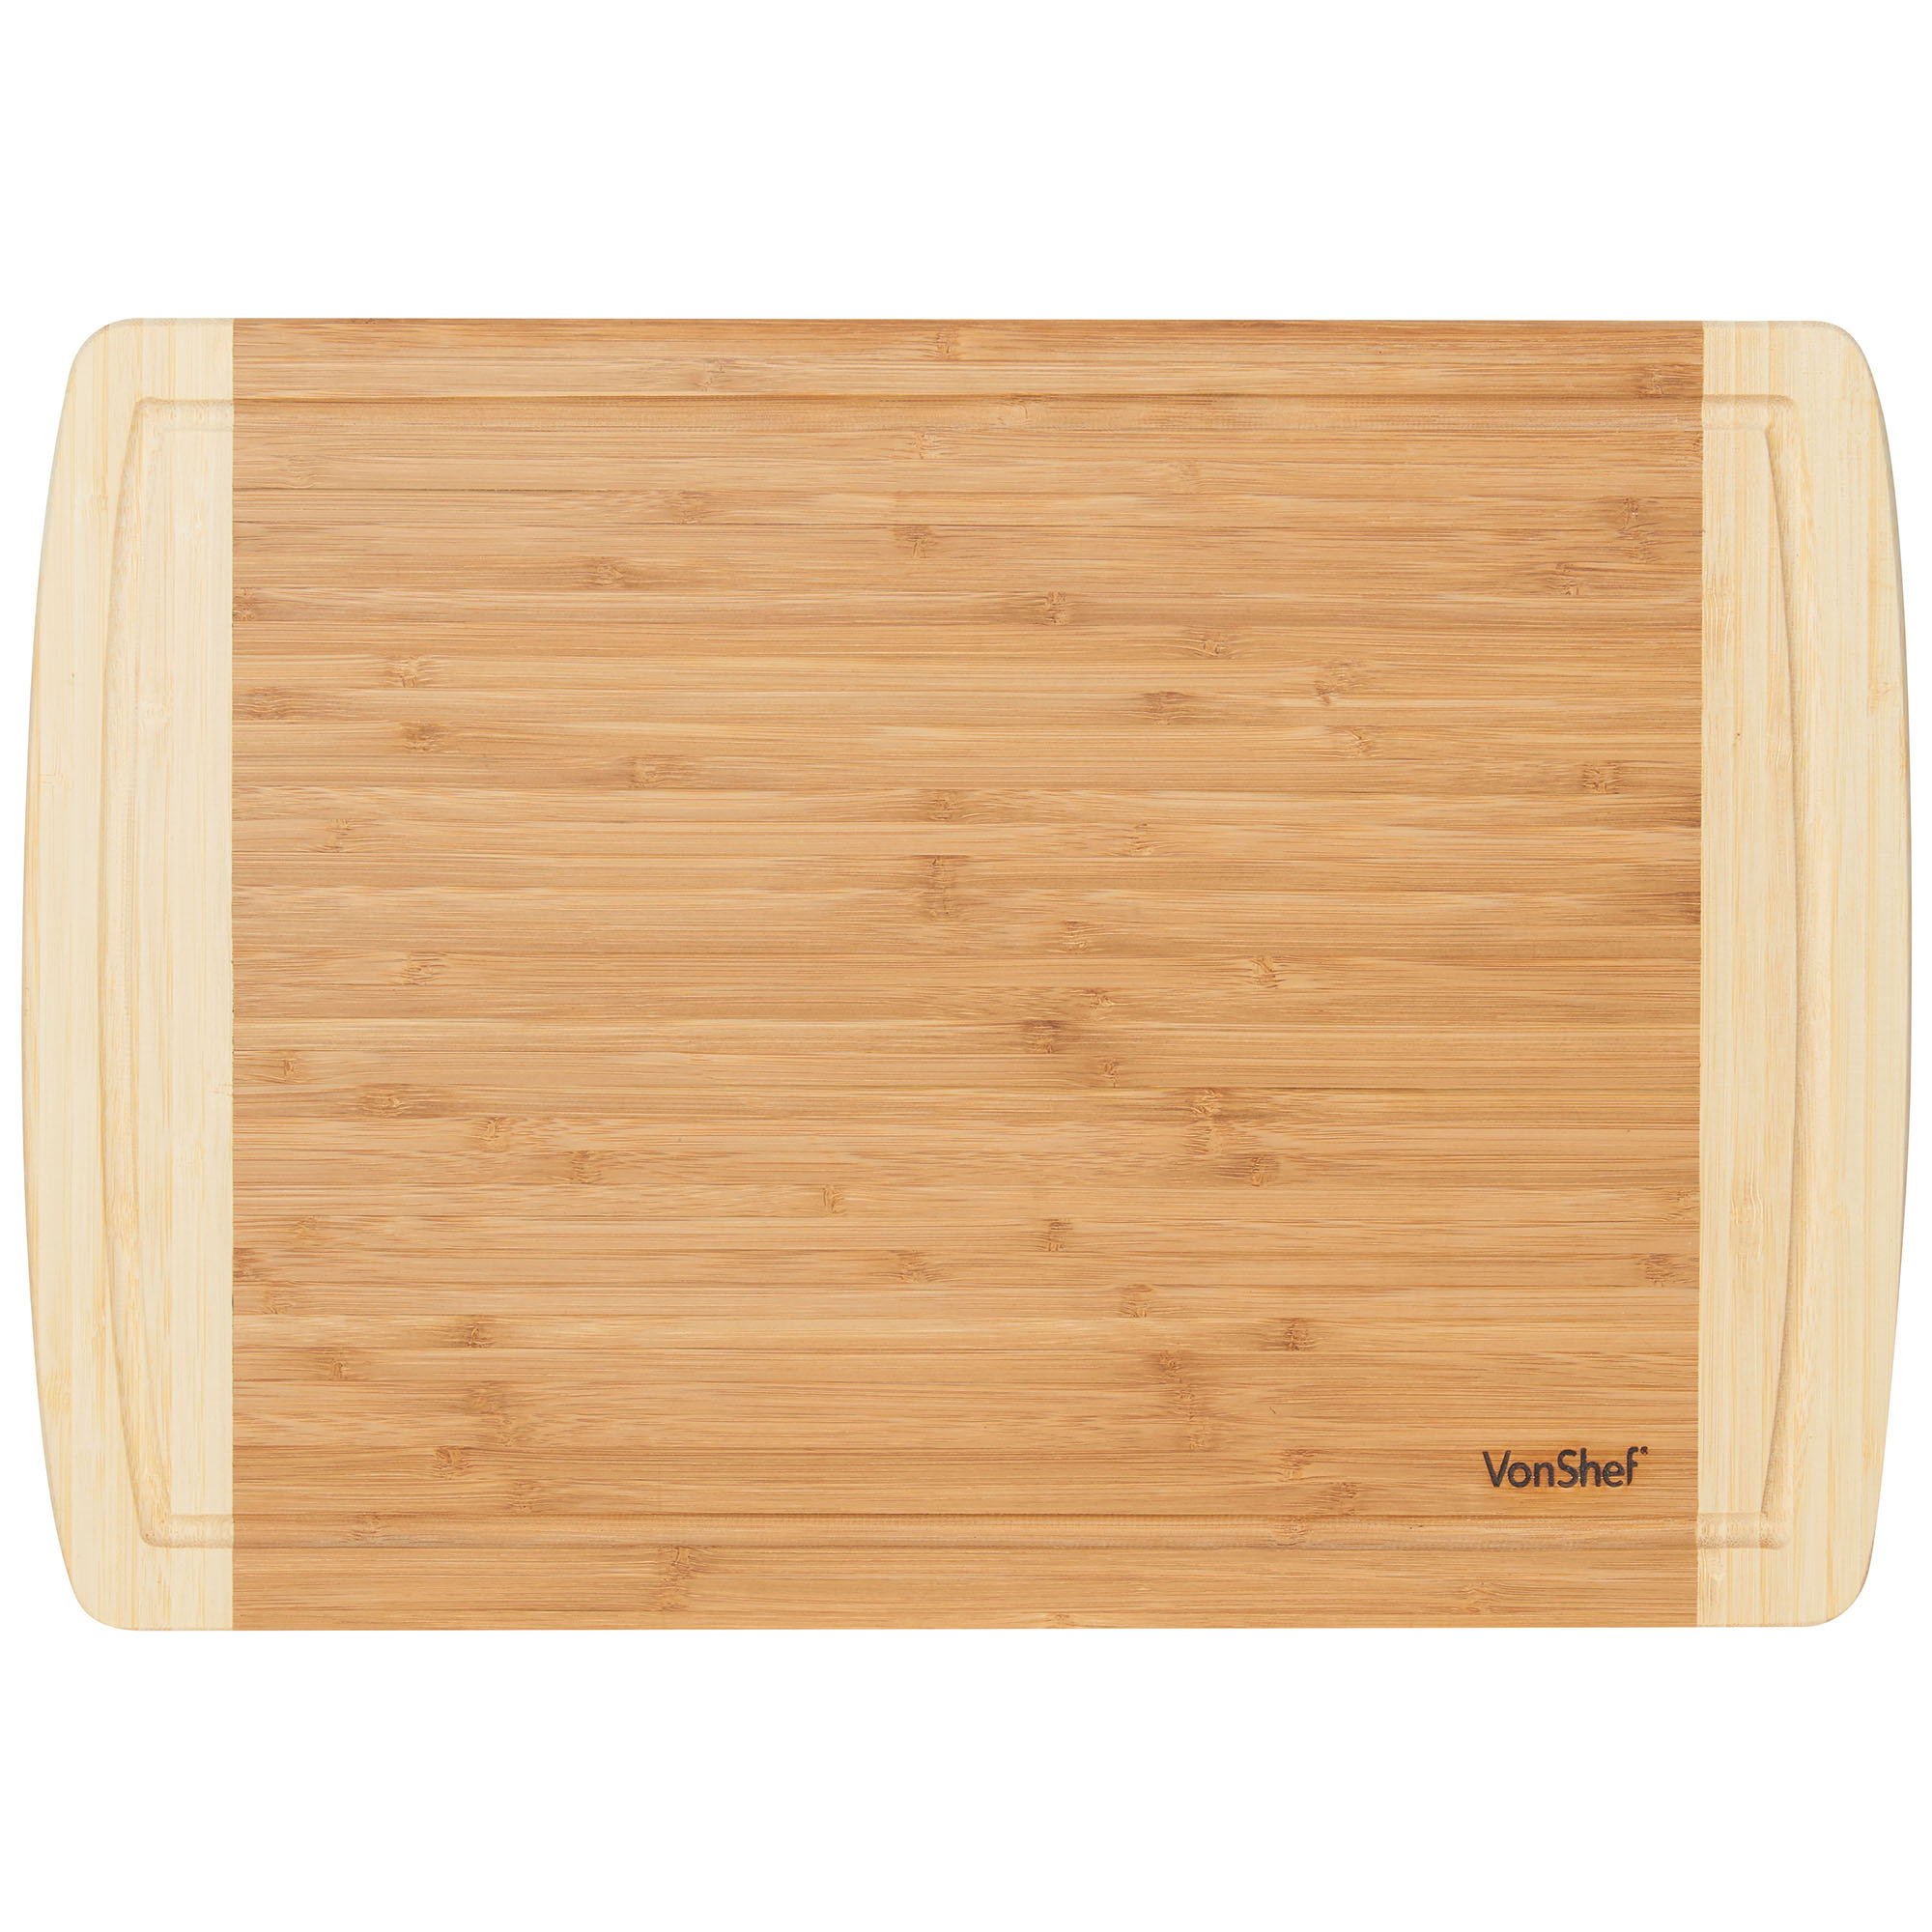 Camco Bamboo Grooved Cutting Board & Reviews